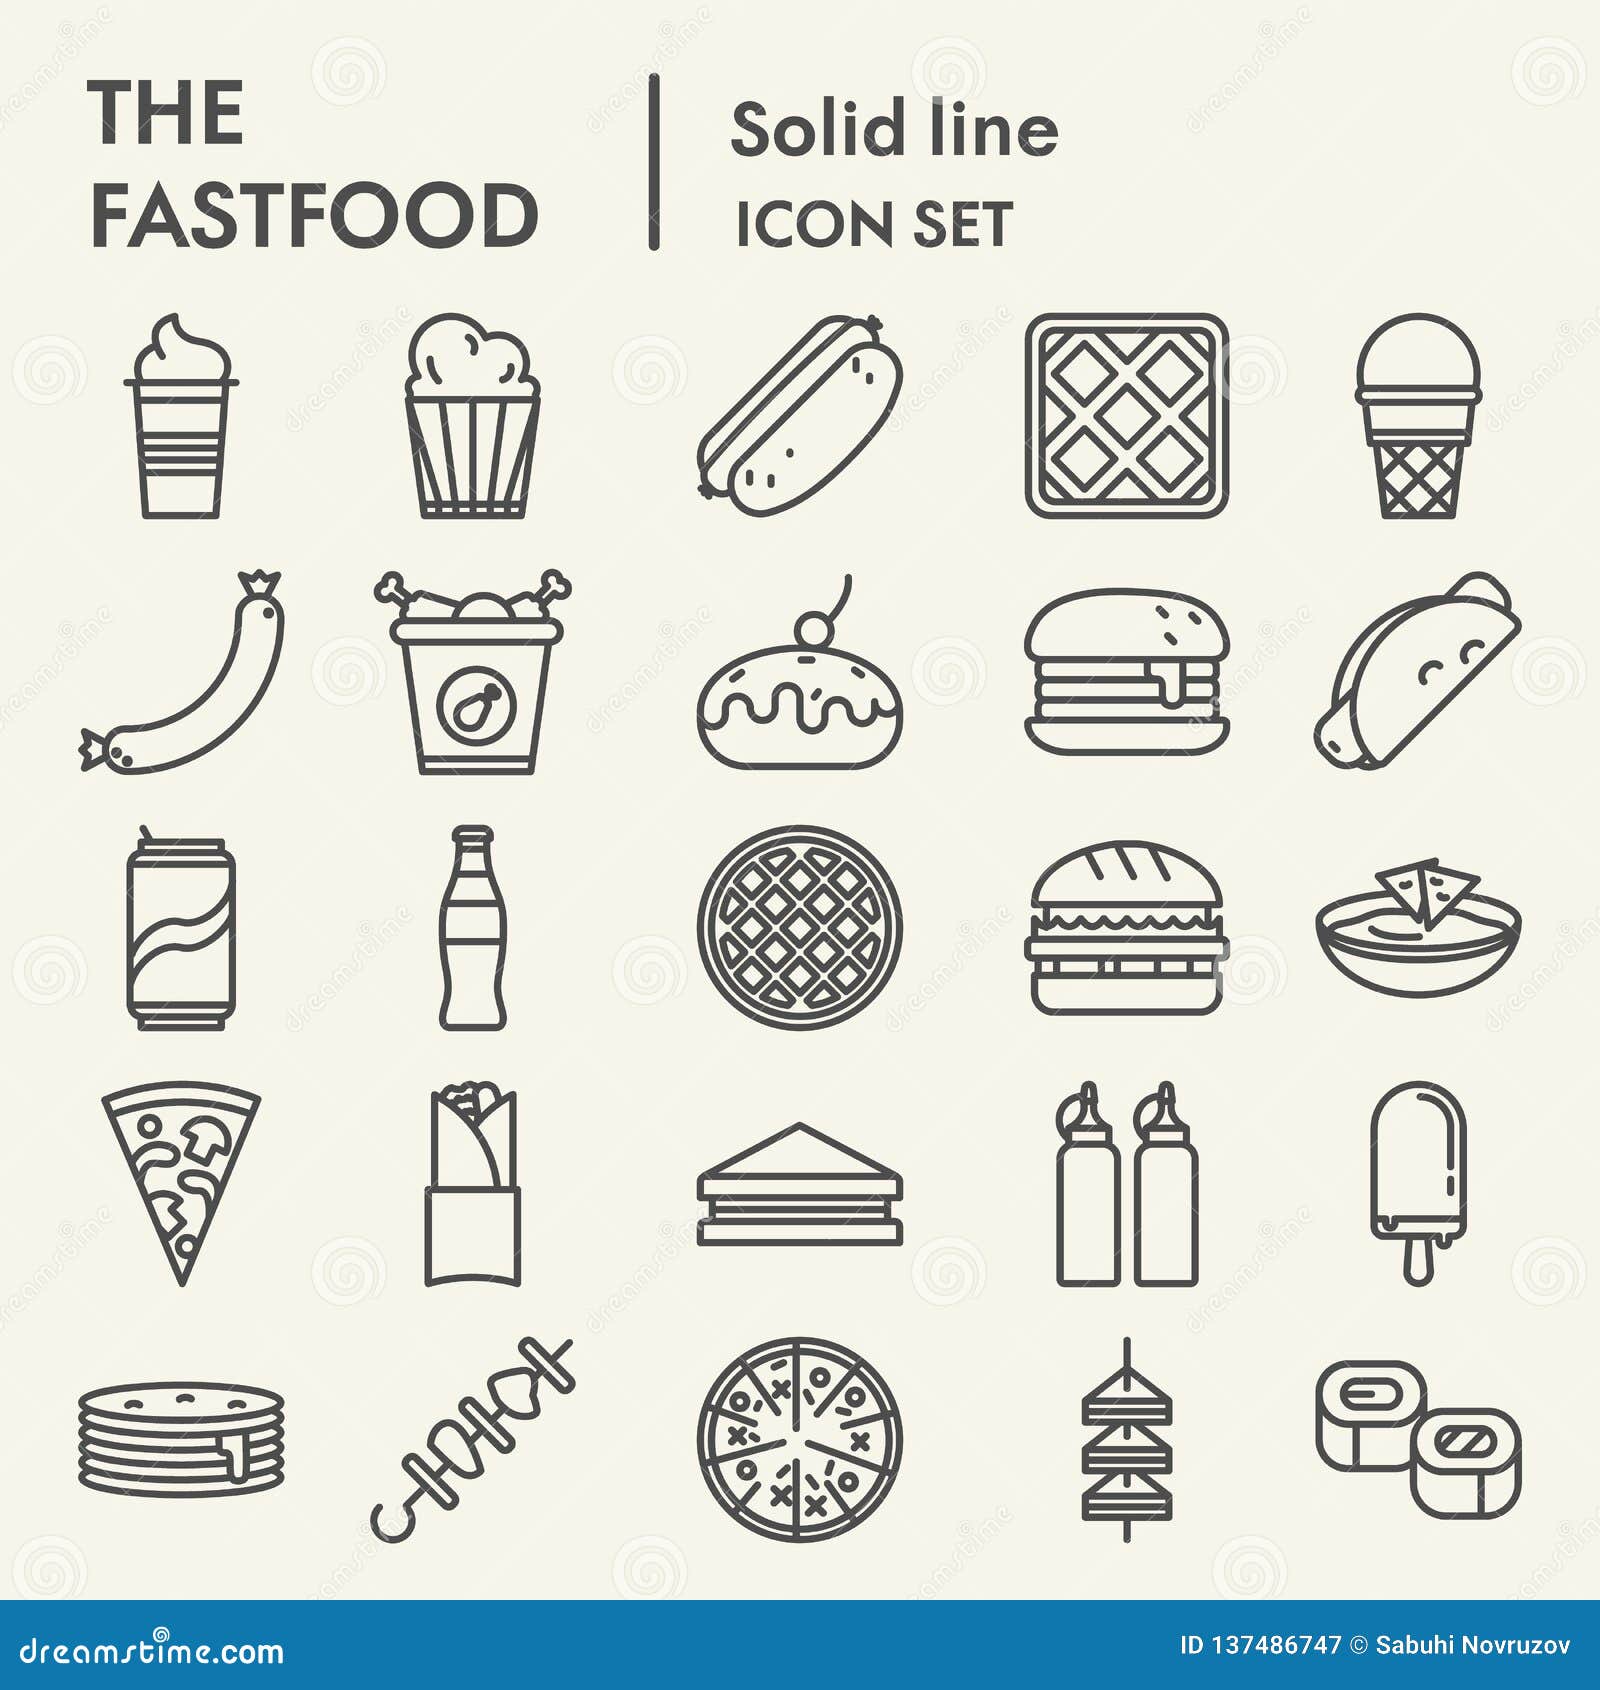 fastfood line icon set, snack s collection,  sketches, logo s, eat signs linear pictograms